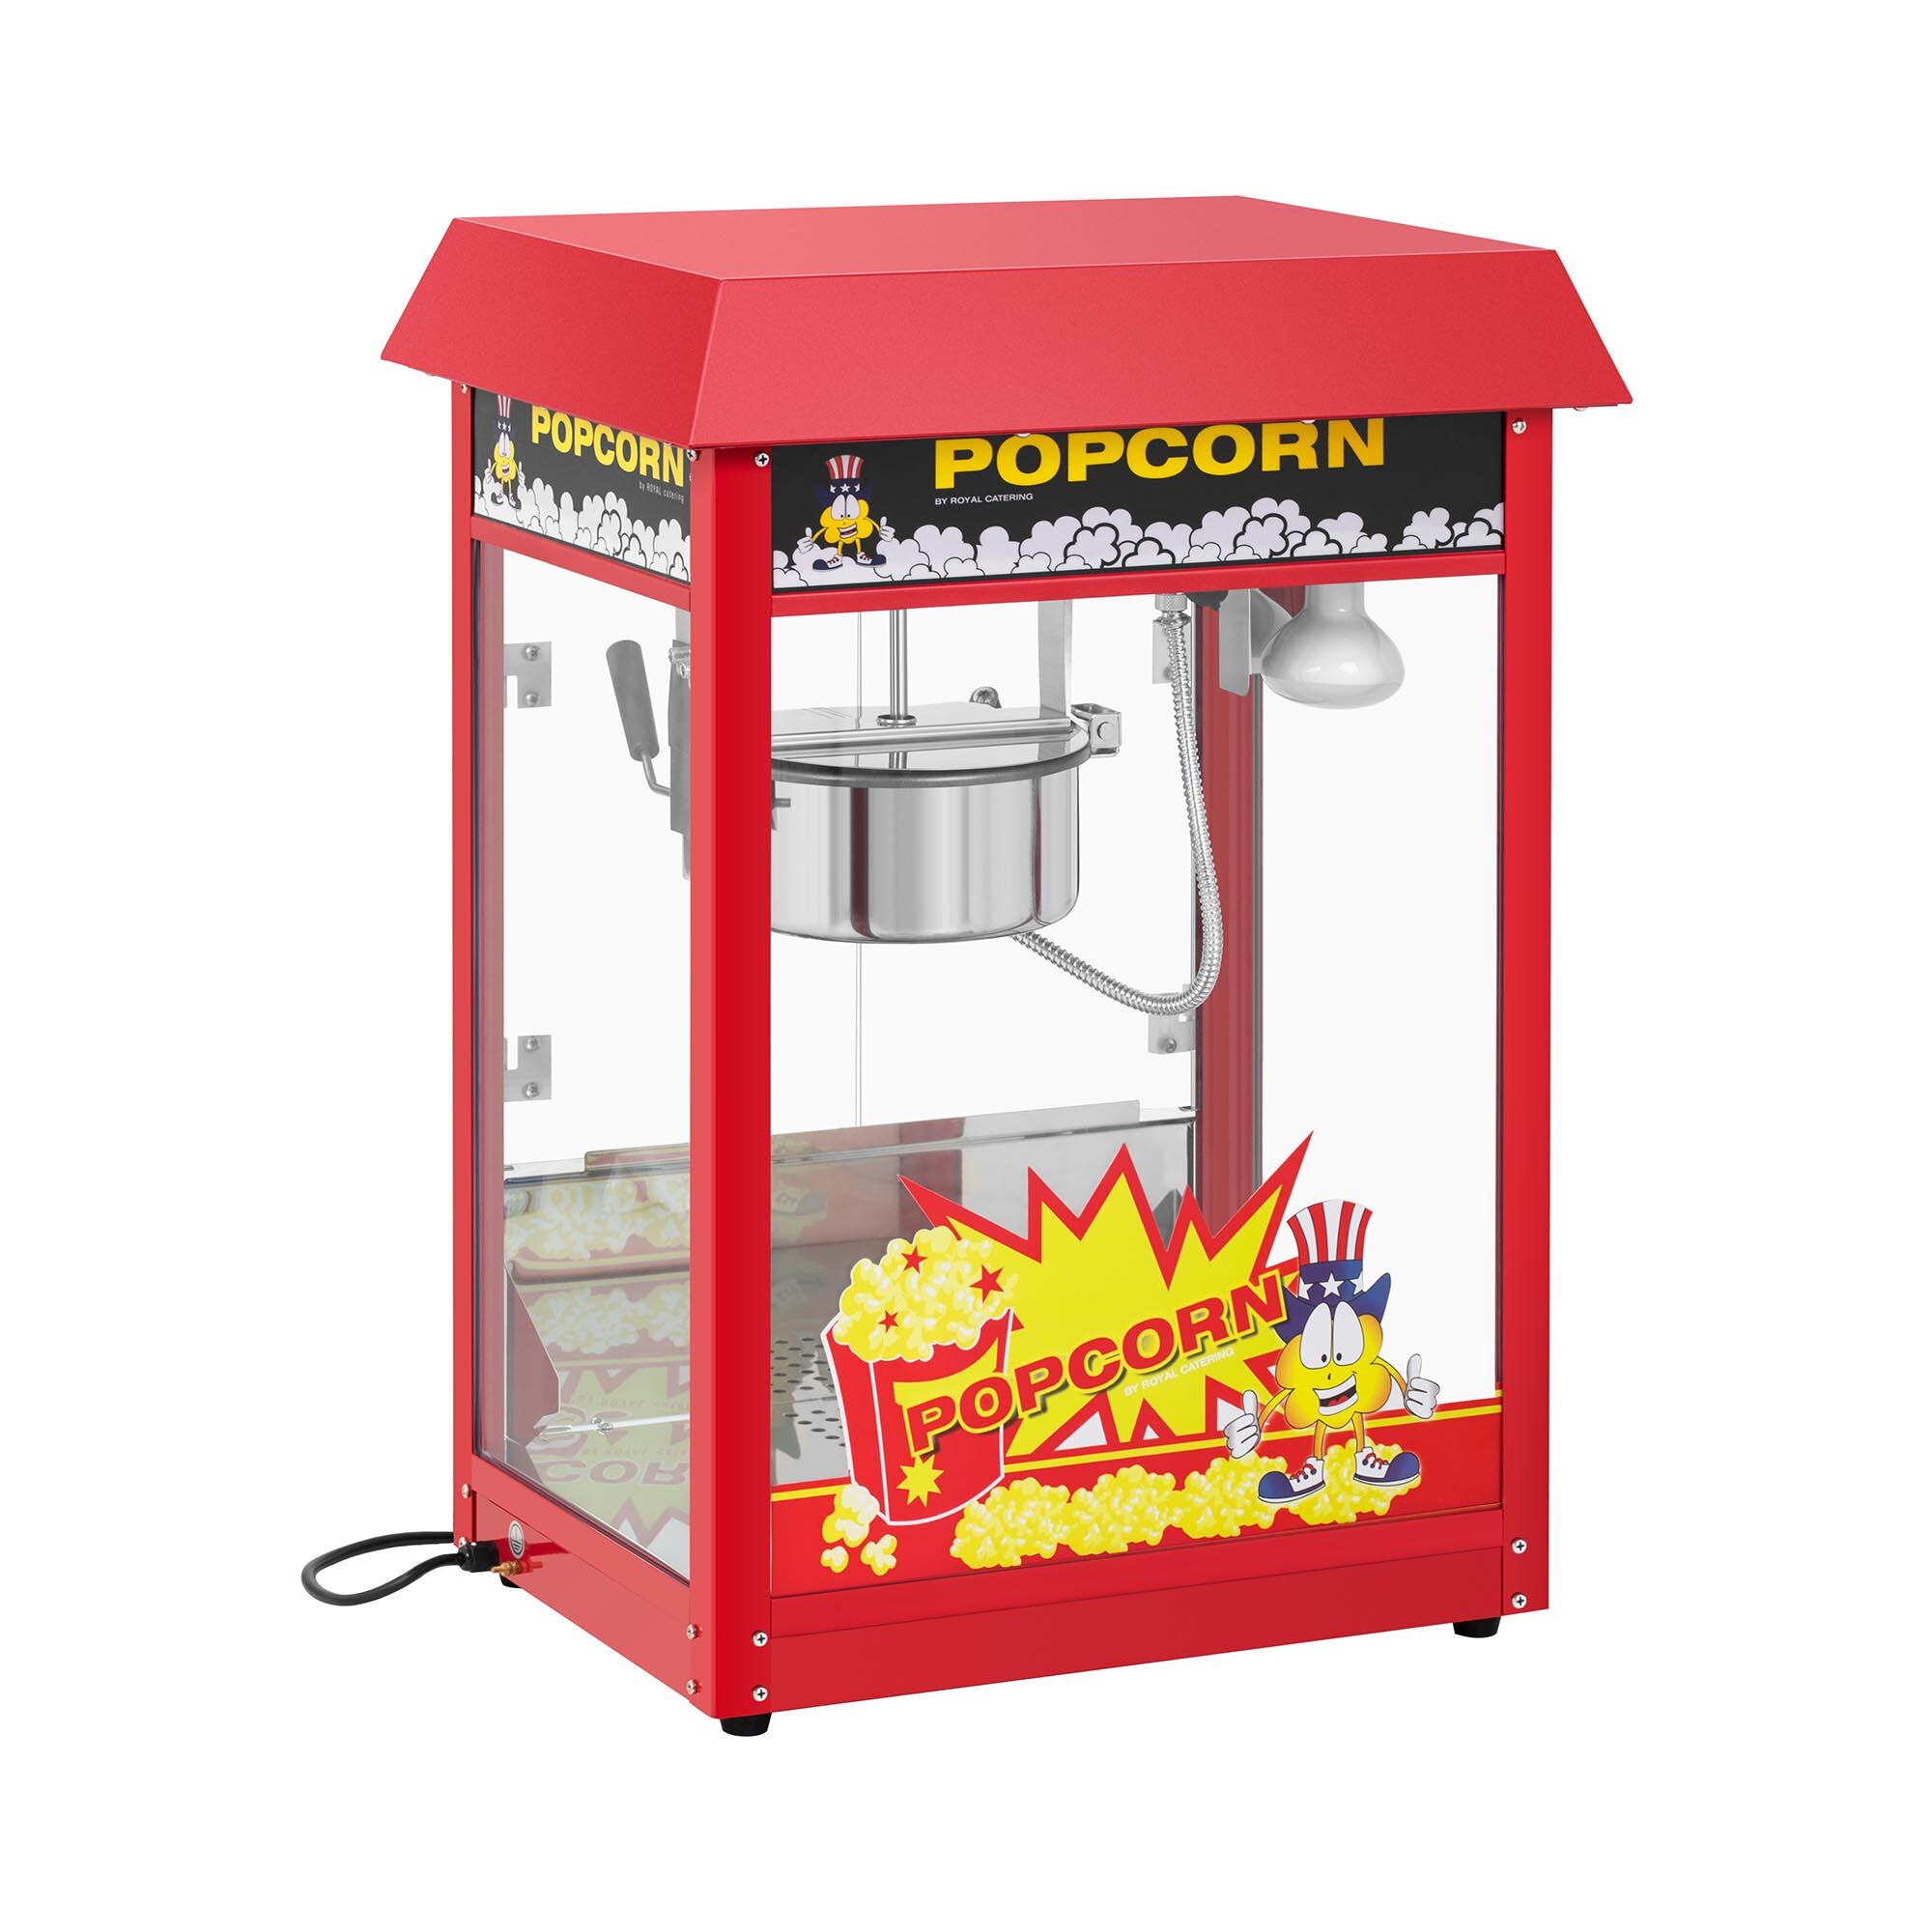 Royal Catering Popcorn machine - 120 s duty cycle - Red roof RCPS-14